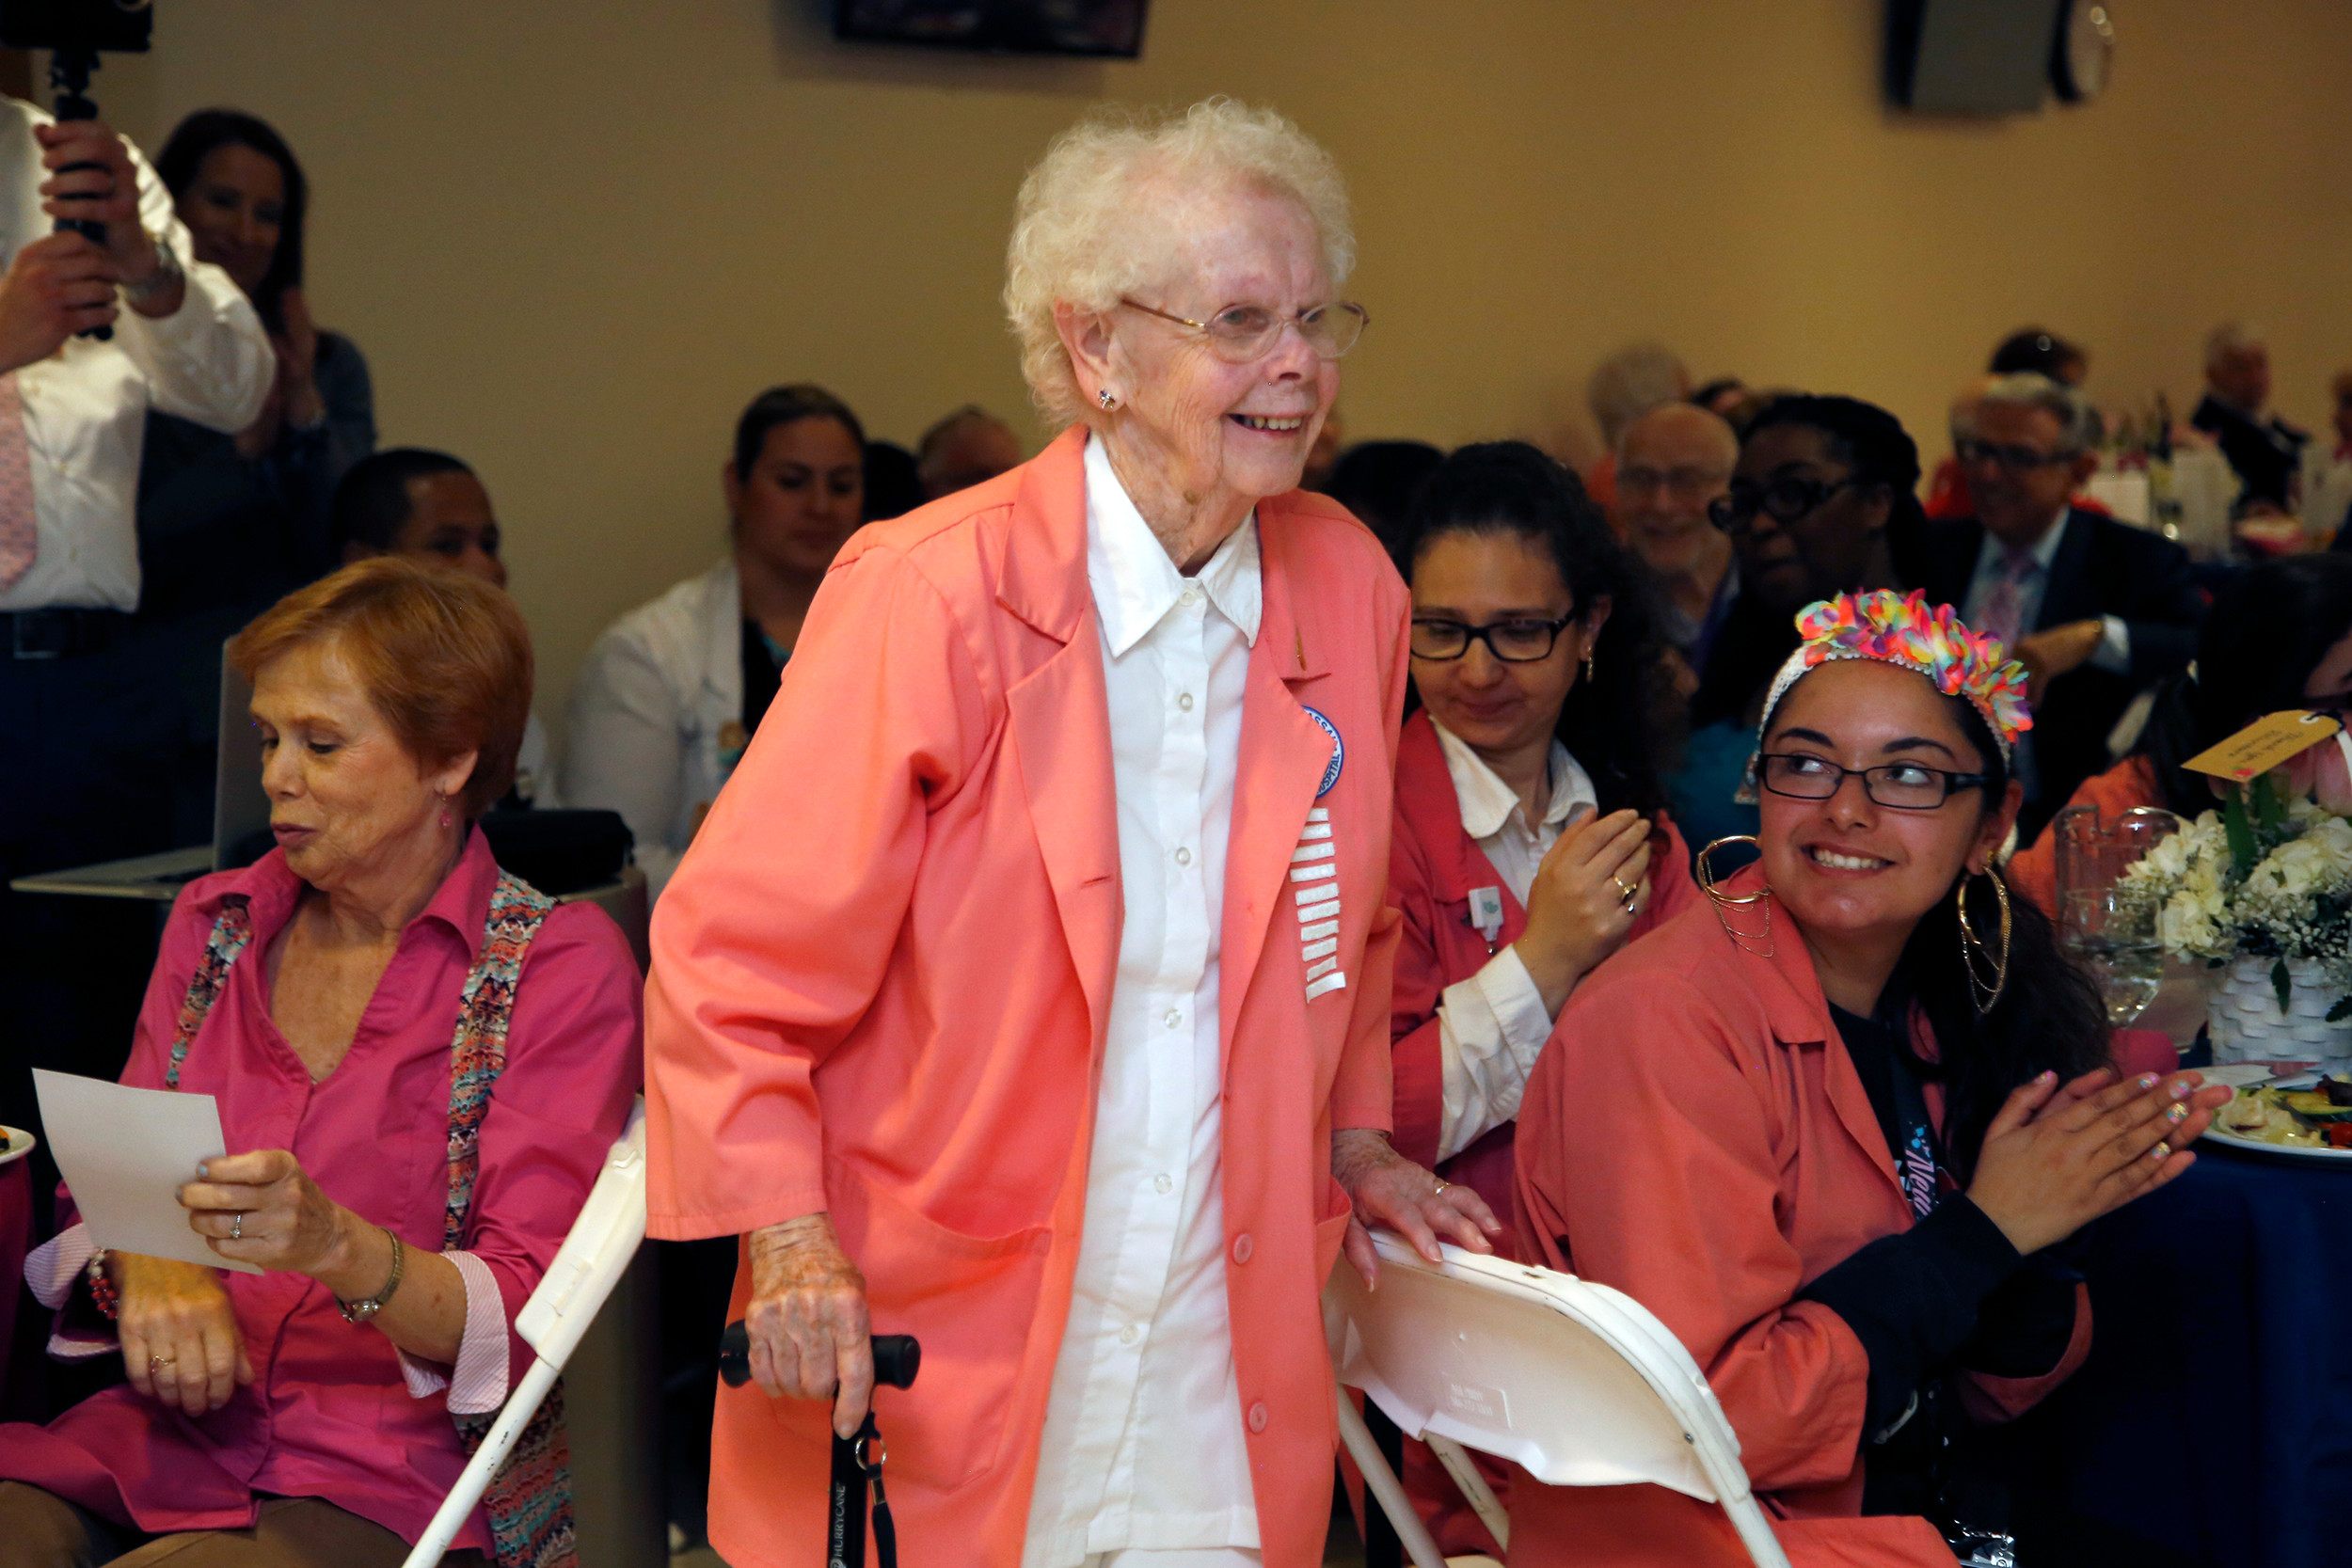 Reinert, who has volunteered at South Nassau Communities Hospital for 55 years, was honored.